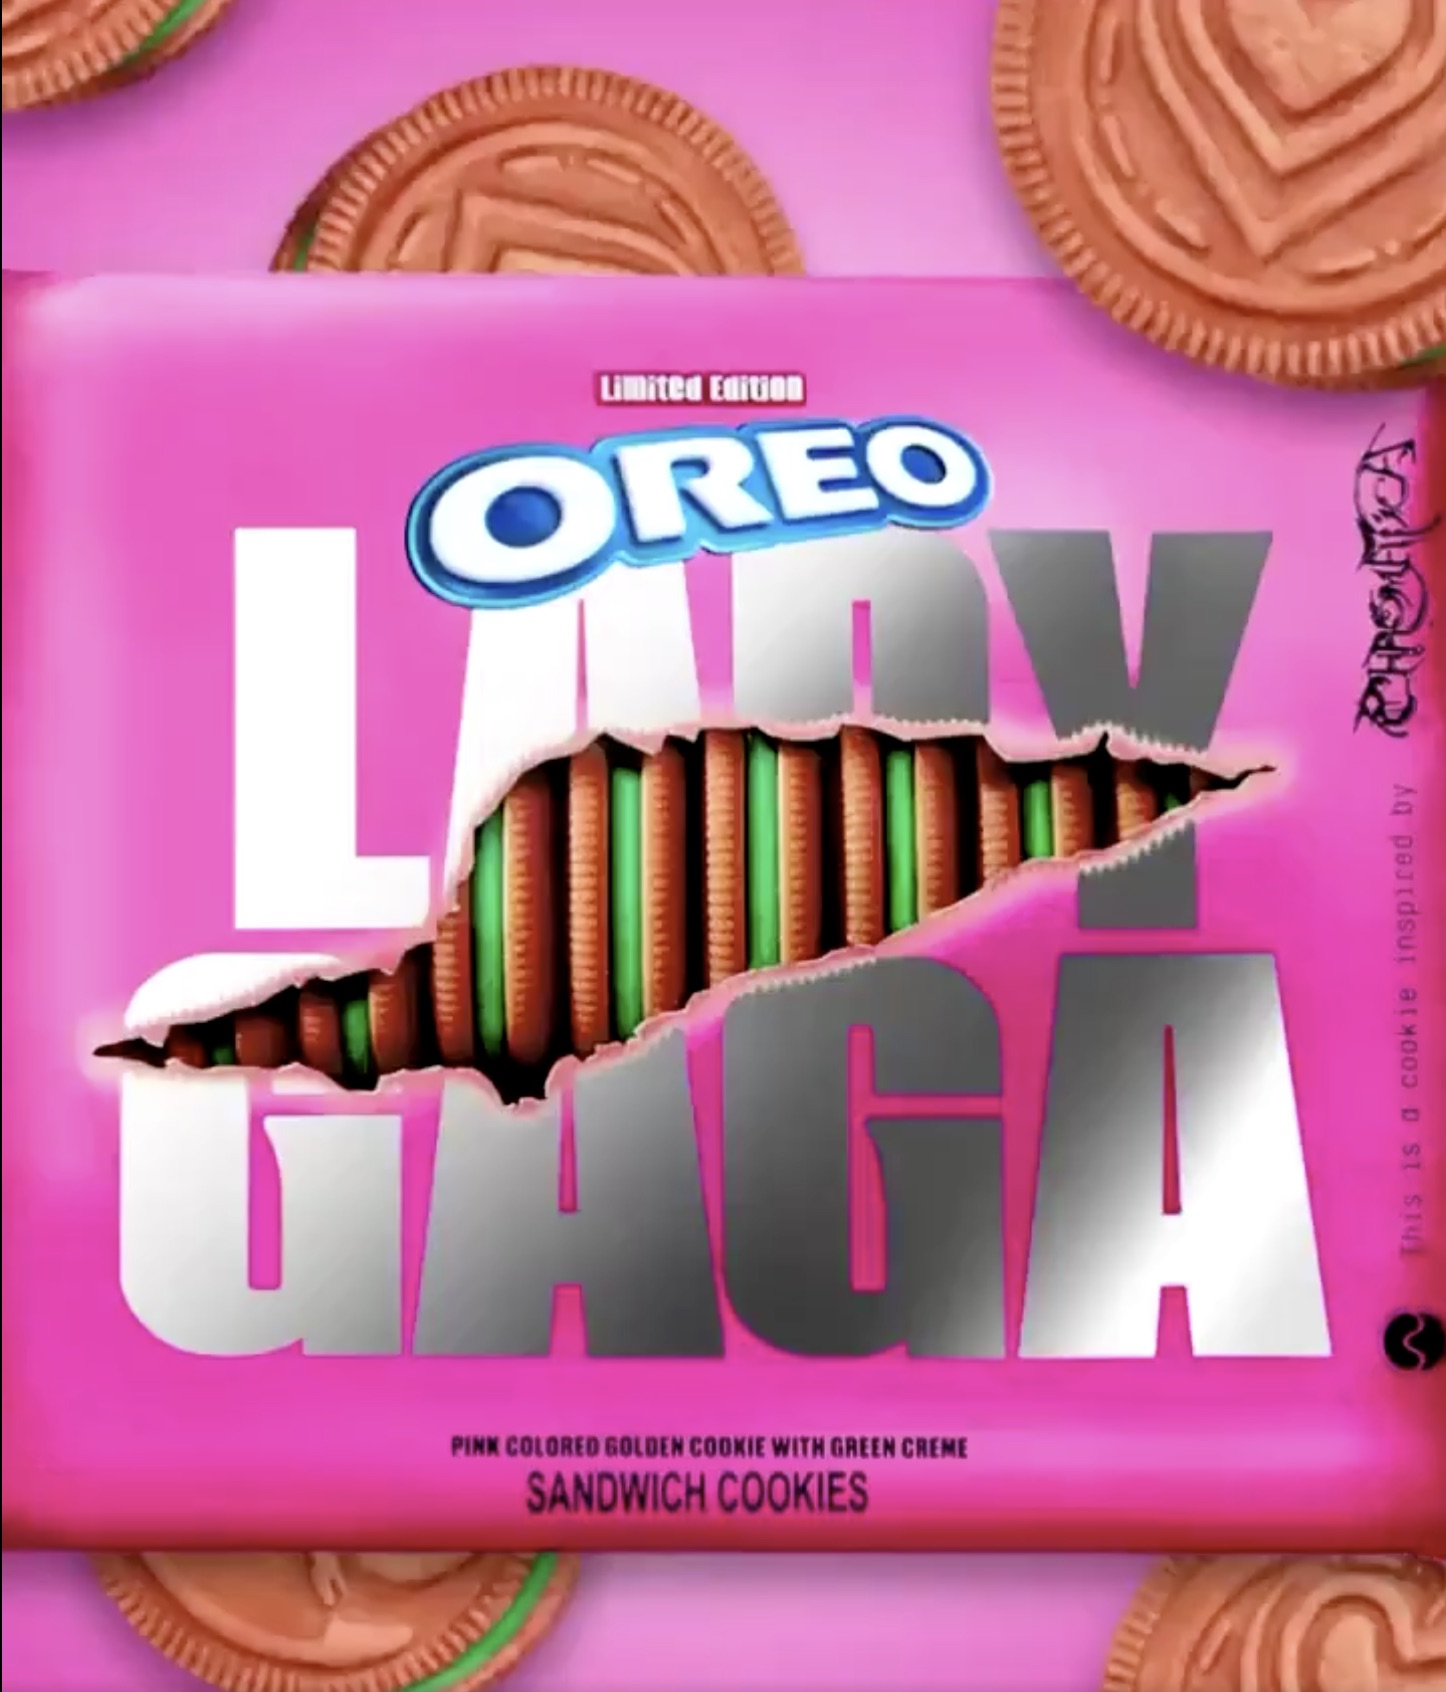 Lady Gaga Chromatica Oreos: Here's what to know about these limited edition pink-and-green beauties! | coolmomeats.com